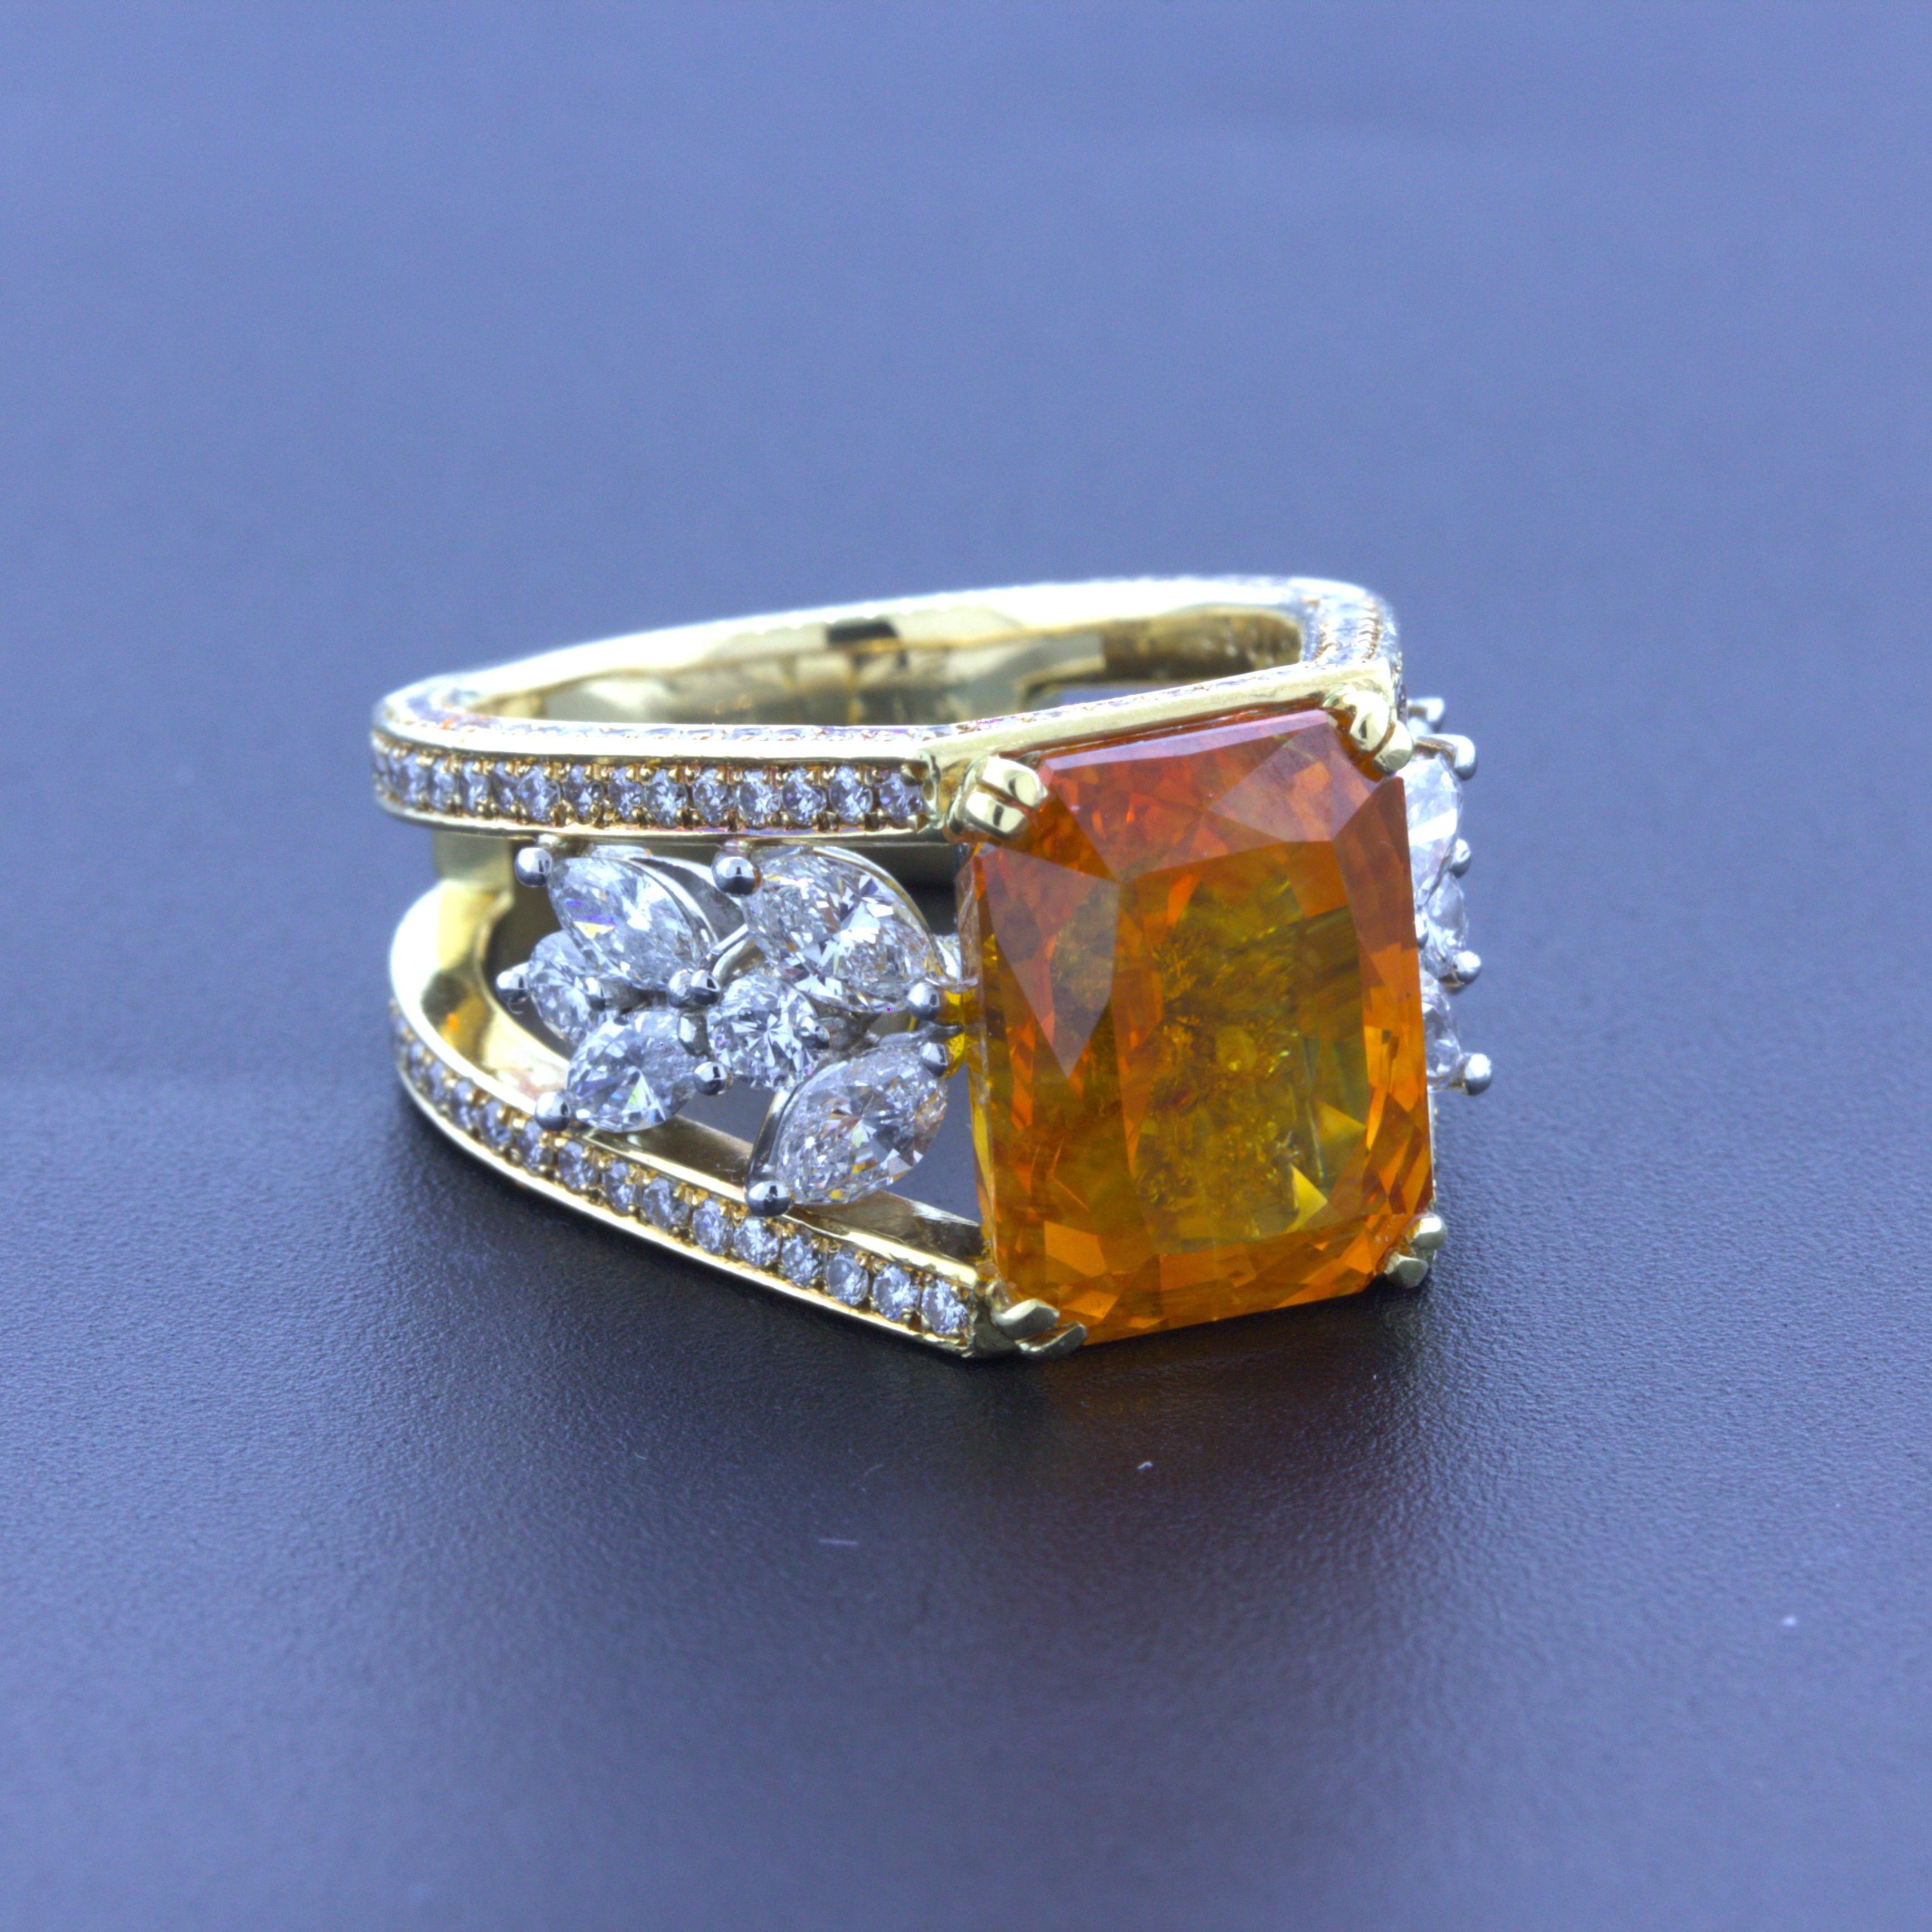 A ring fit for royalty! This regal and decorative piece features a large and impressive orange sapphire weighing 10.80 carats. The combination of its large size and fine quality makes this stone very special, as it has a rich velvety orange color